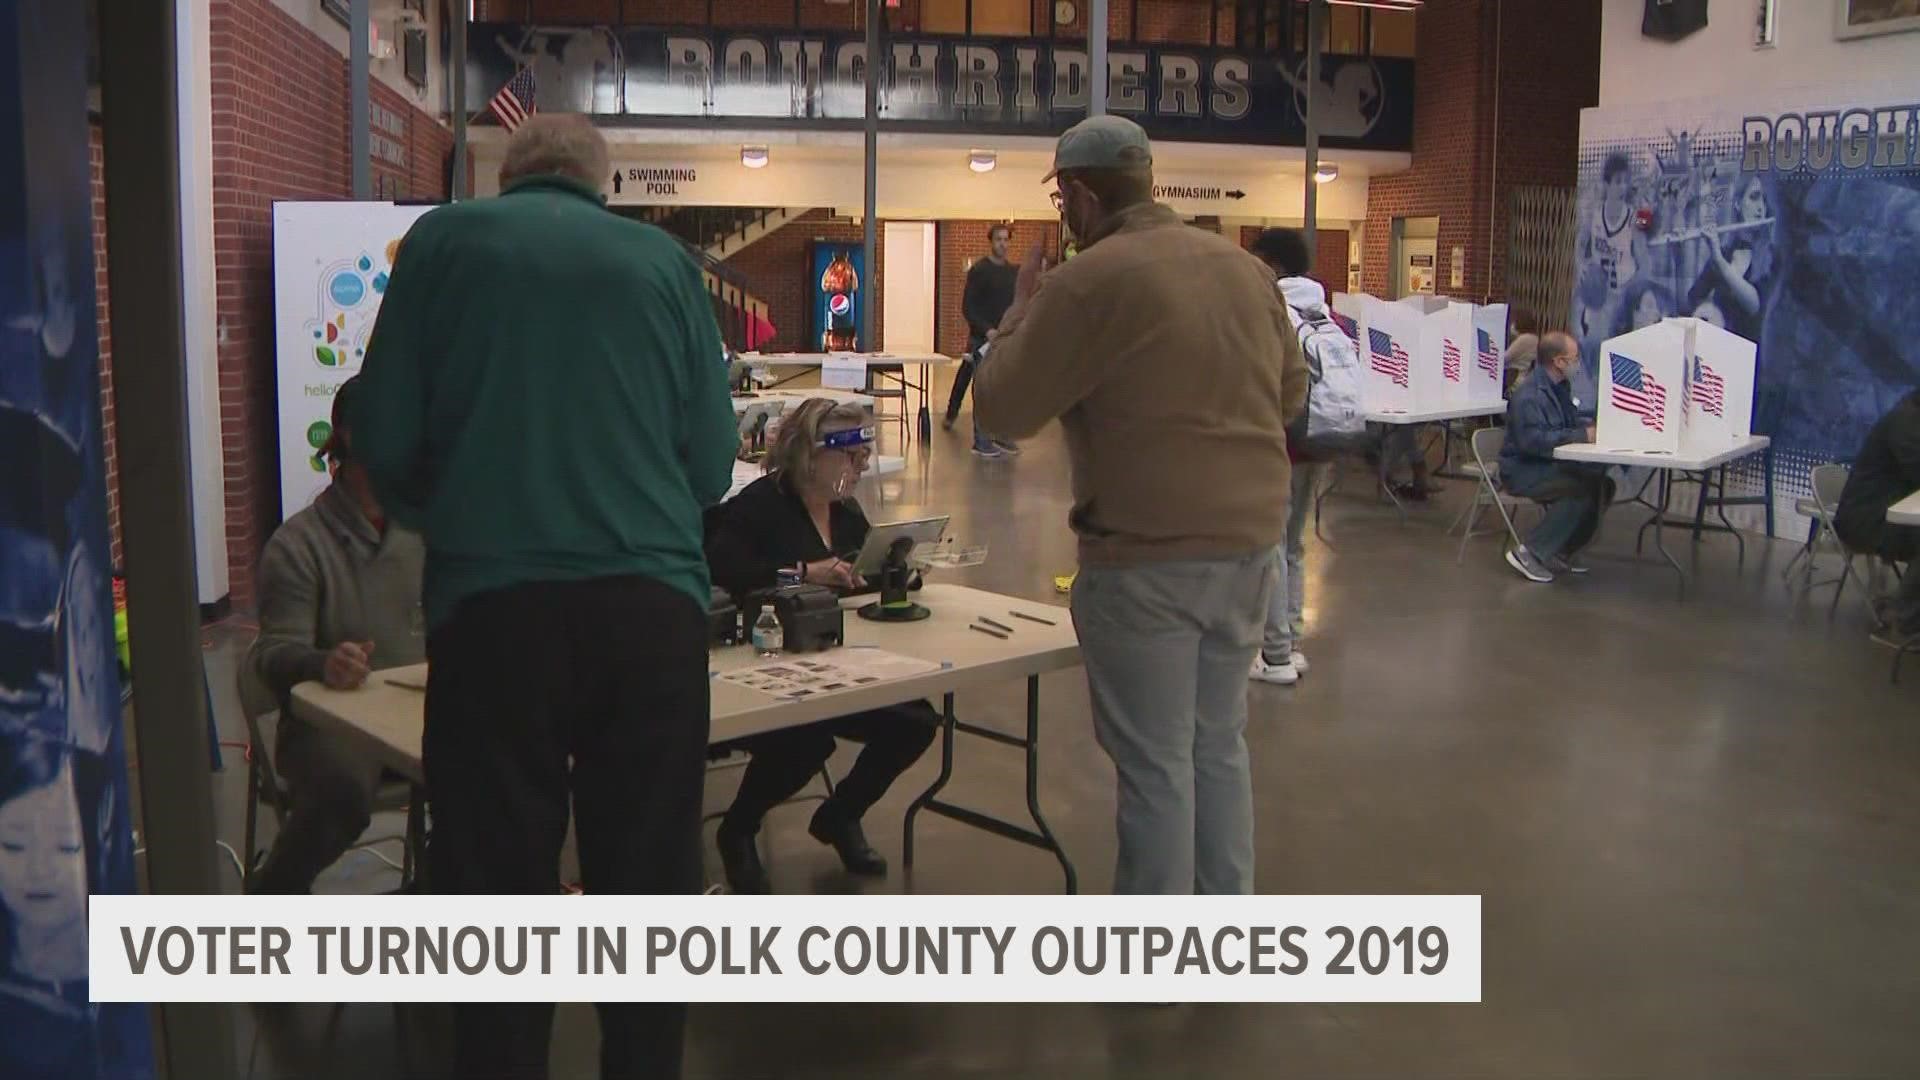 While 2019 was a record-setting year for the county, this year the Polk County auditor says nearly all those records were shattered.